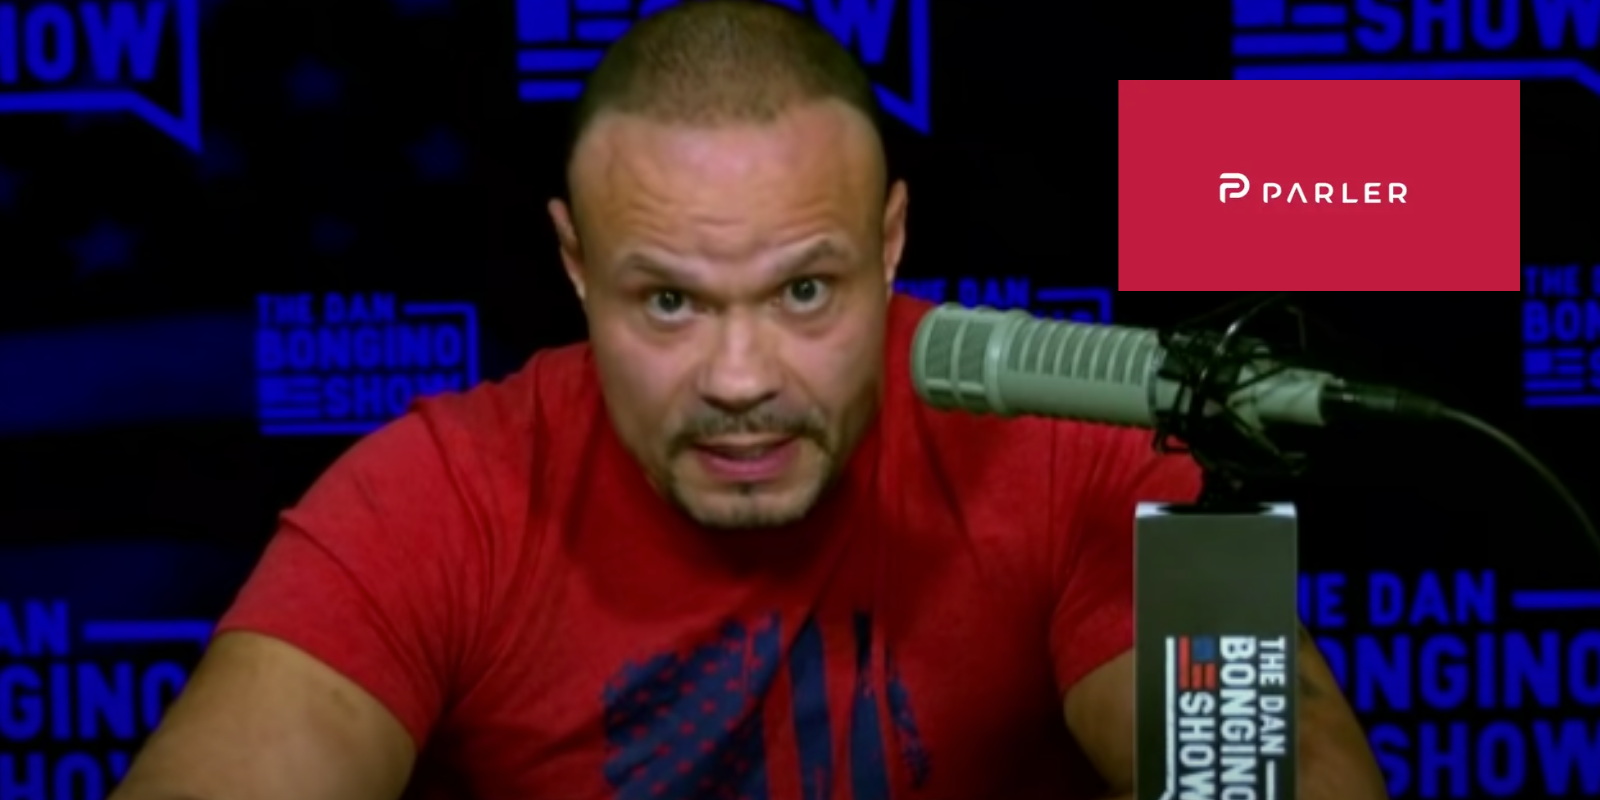 Bongino-backed Parler soars to #1 spot in app stores, passes TikTok and YouTube